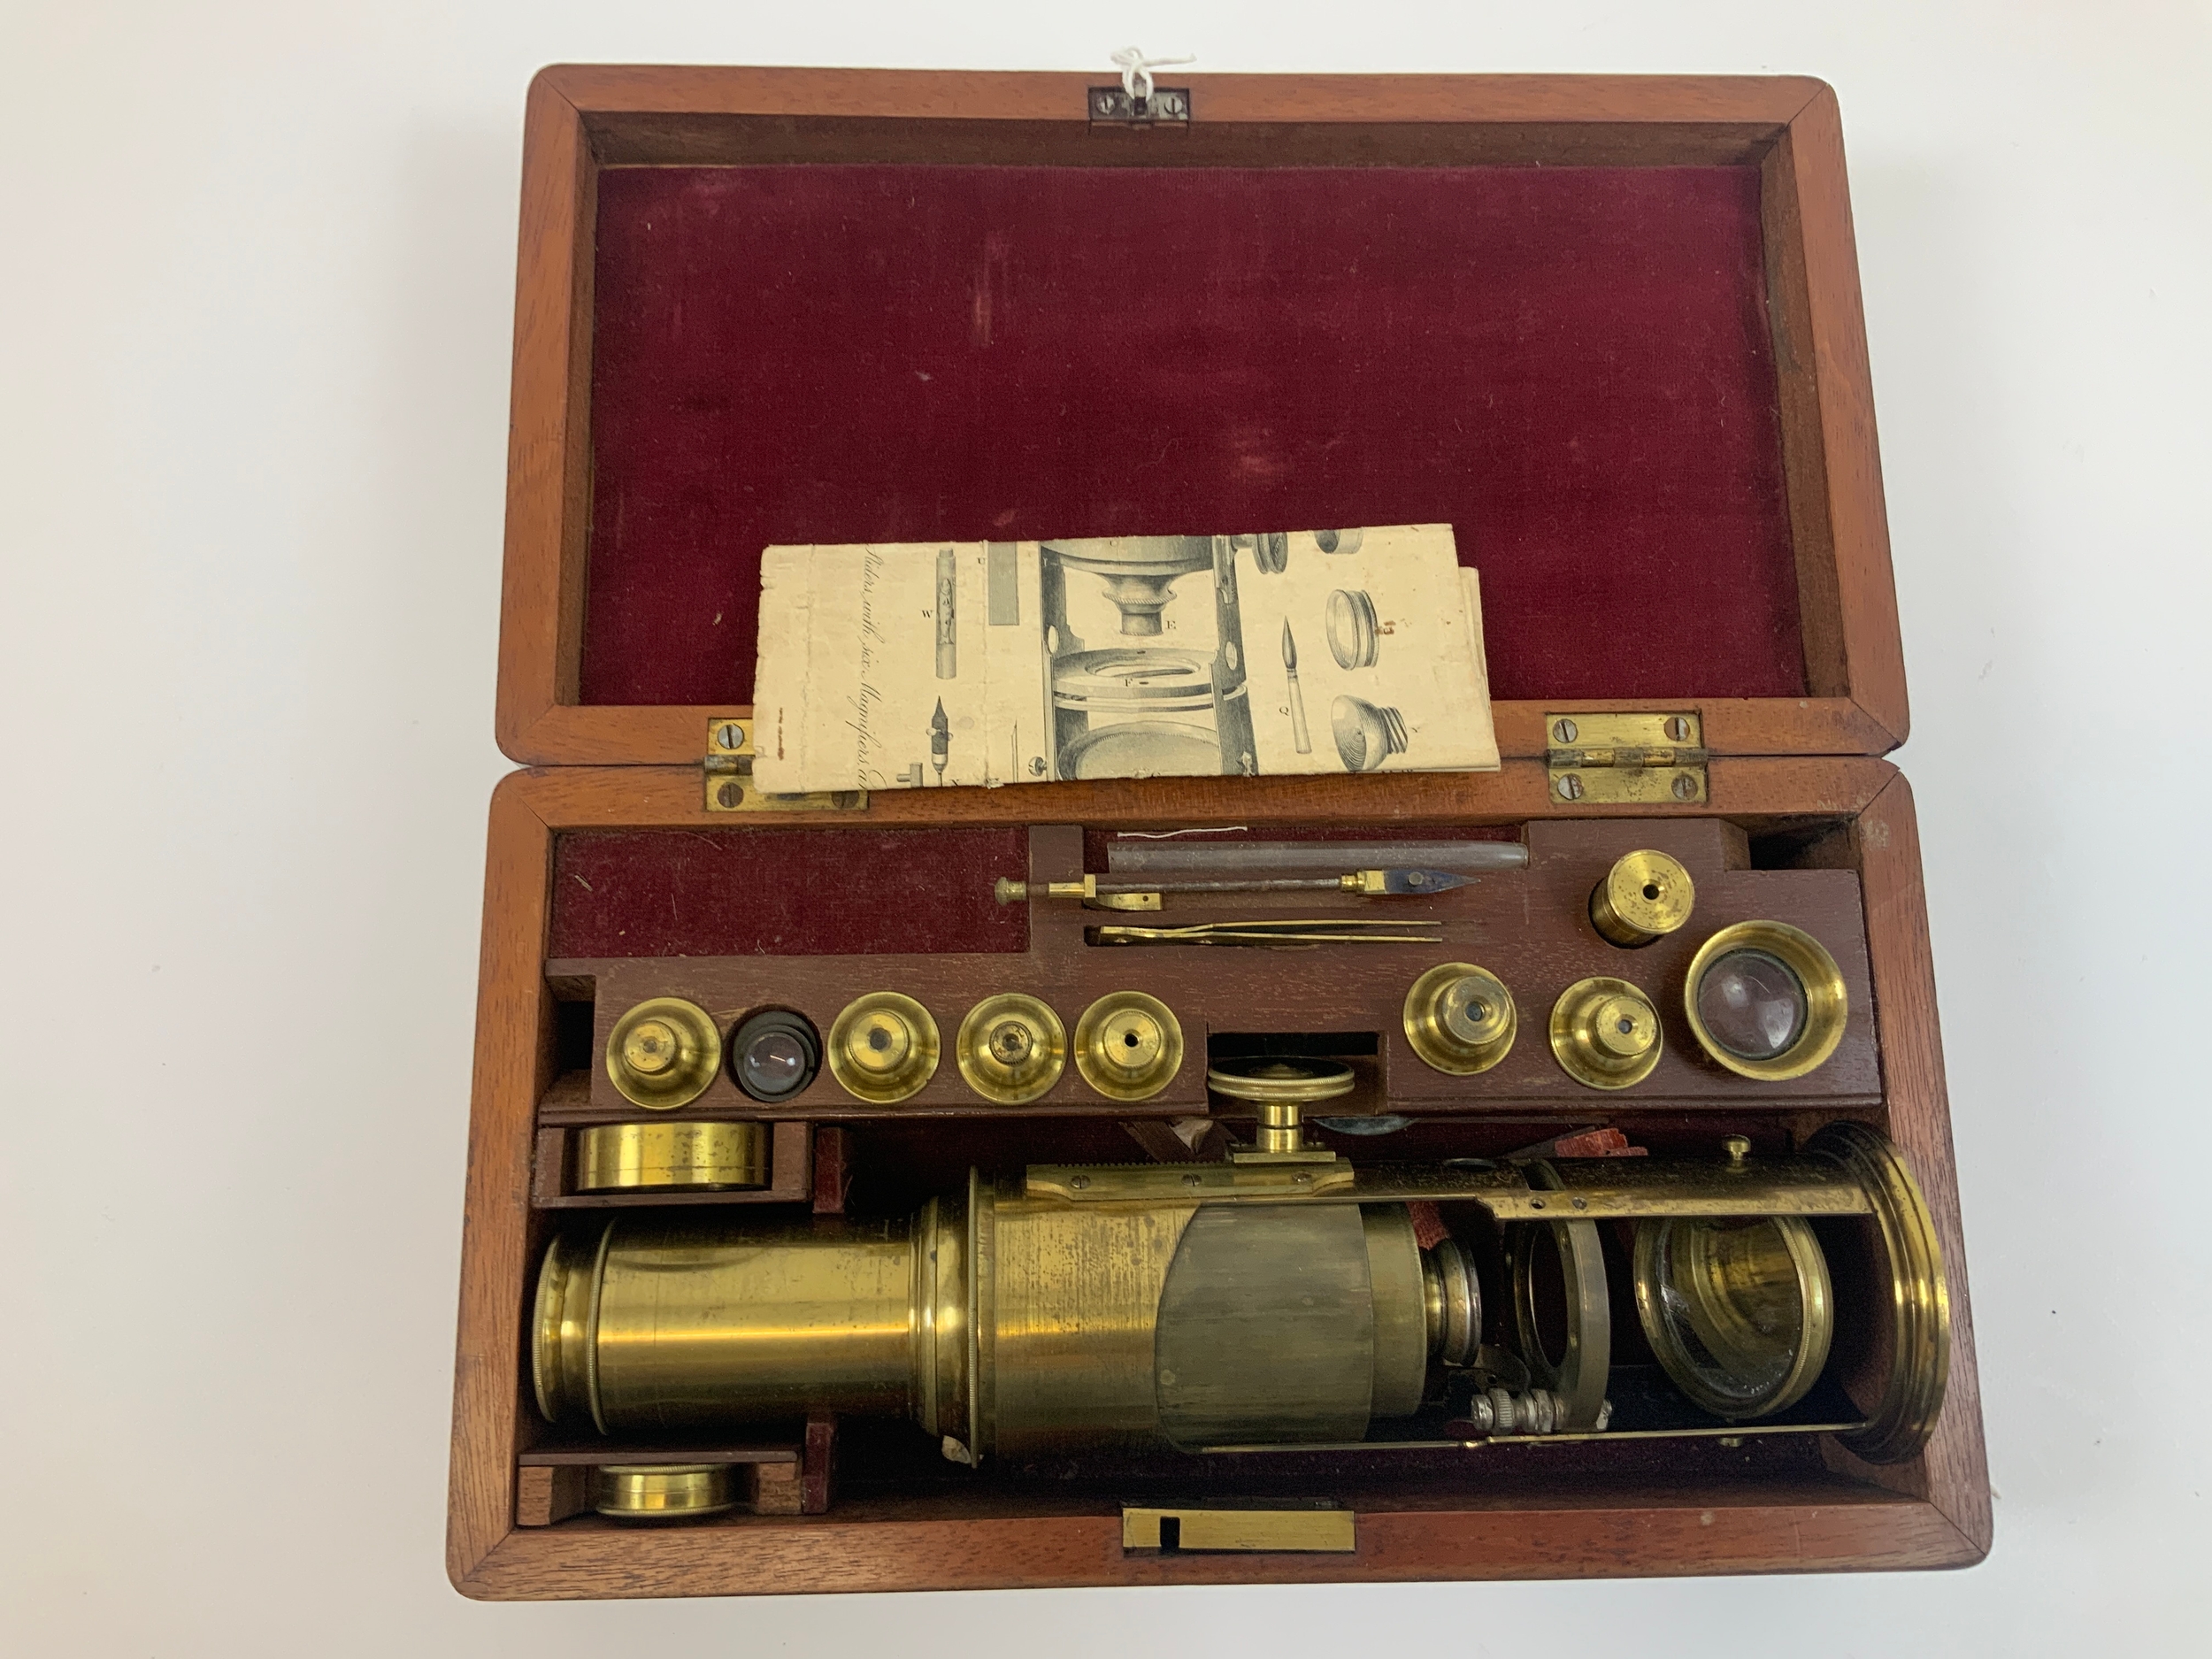 Near Complete Victorian Brass Microscope with Original Box and Instructions - Box 27cm x 15cm